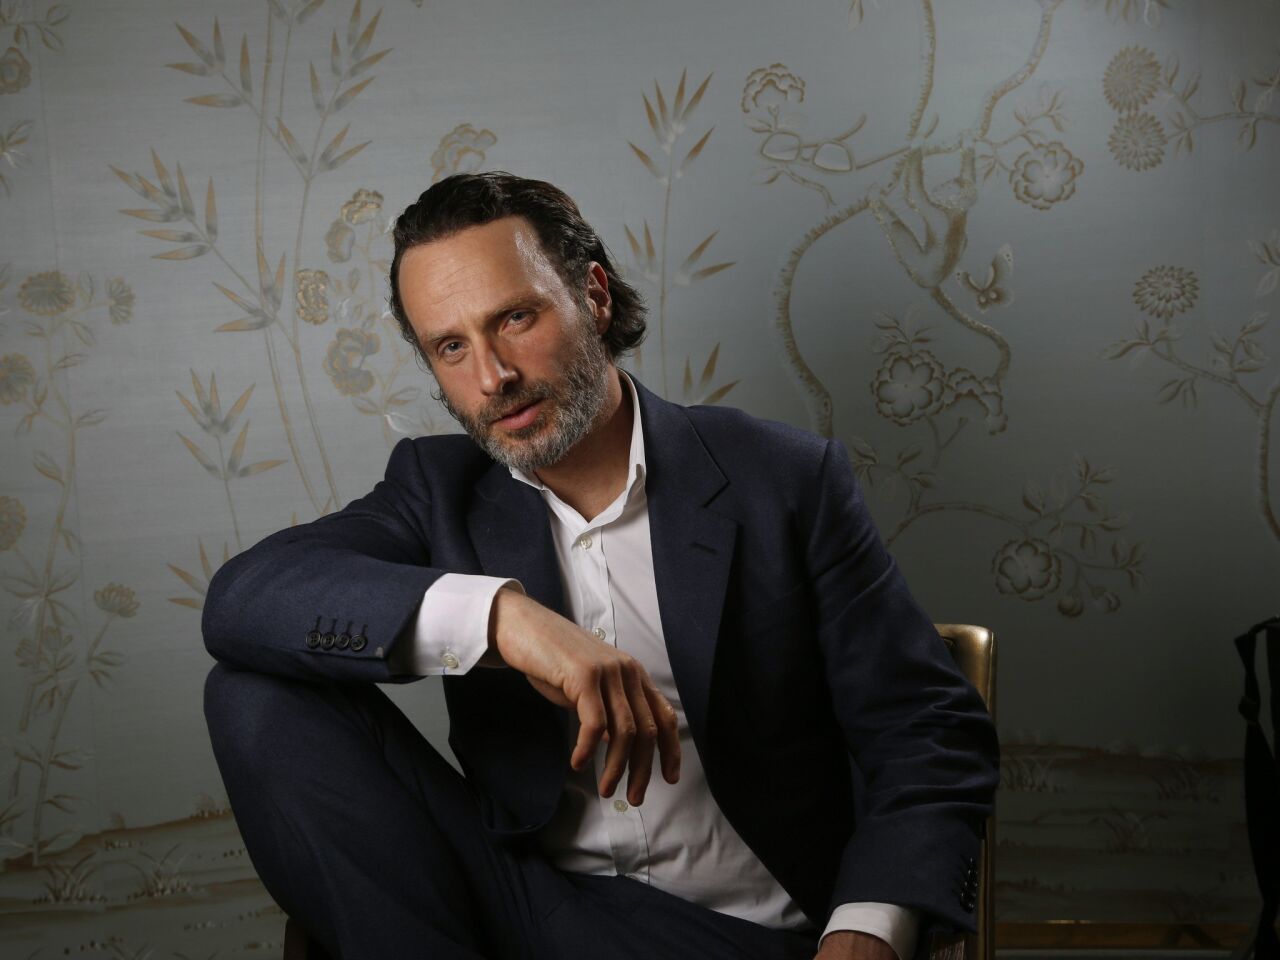 Andrew Lincoln of "The Walking Dead" talks about the incredible popularity of the series and why the television academy can't seem to wrap its arms around a genre TV show about zombies.